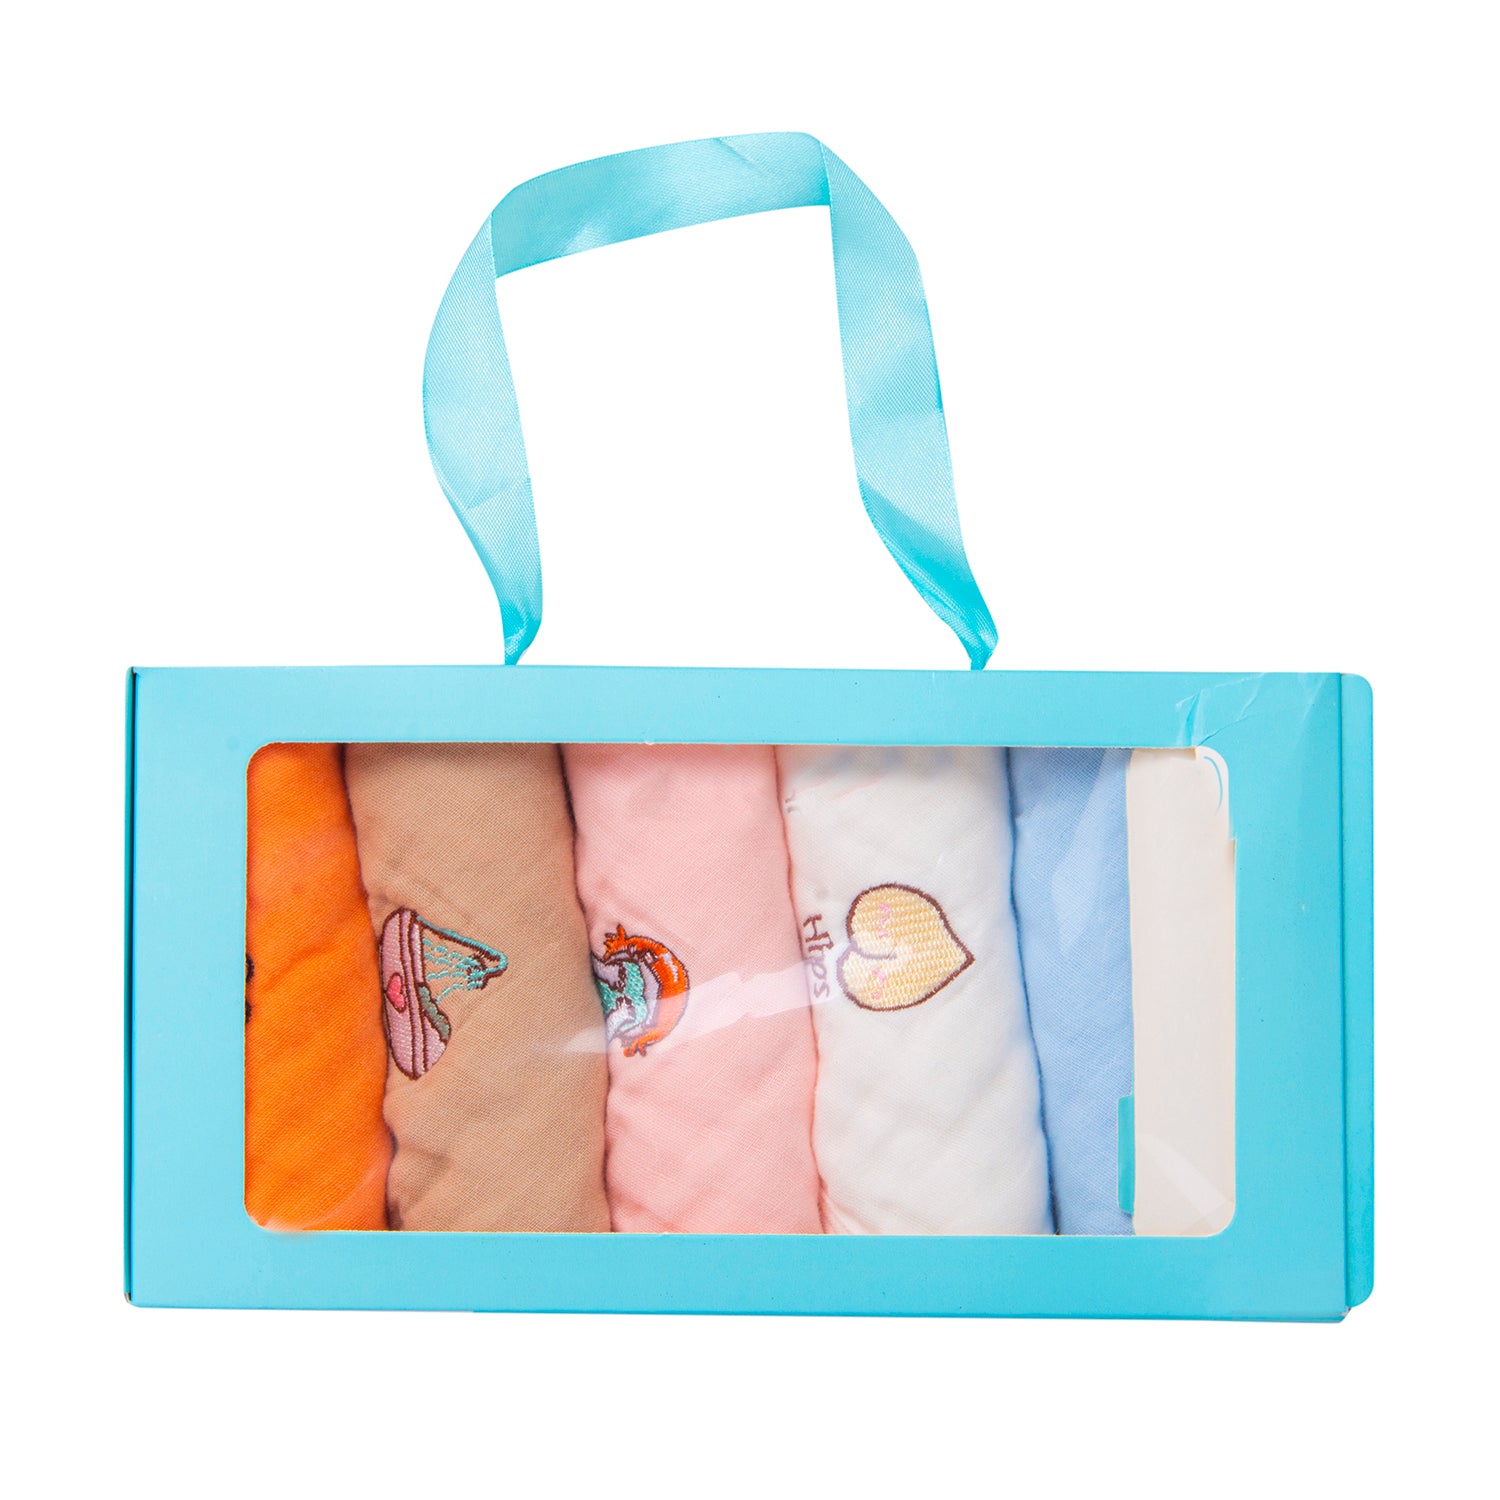 Wash Cloth Muslin Napkins Pack Of 5 Multipurpose Multicolour - Baby Moo